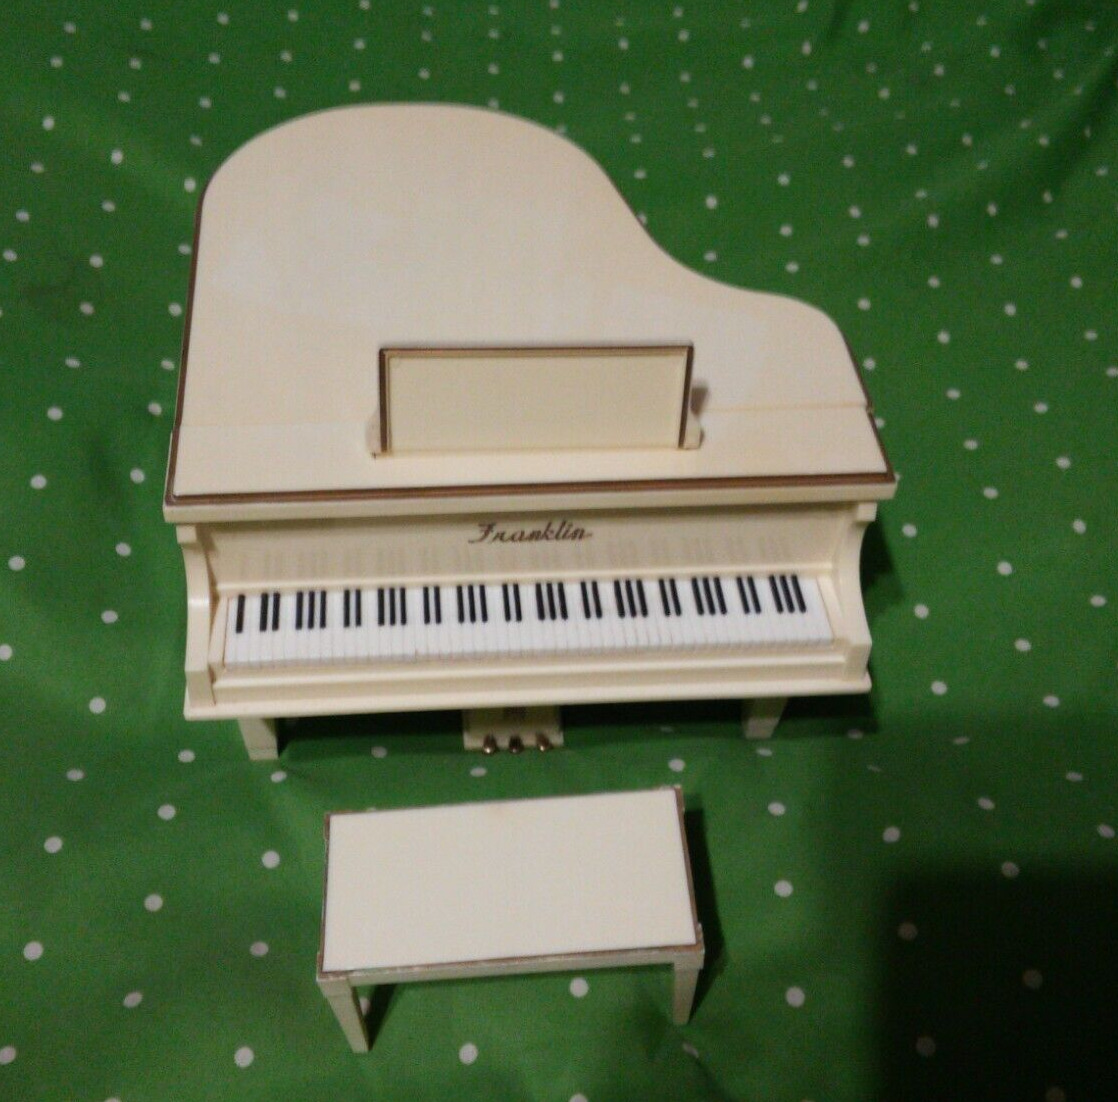 1960s Vintage Franklin AM transistor radio Grand Piano with chair Japan xlnt